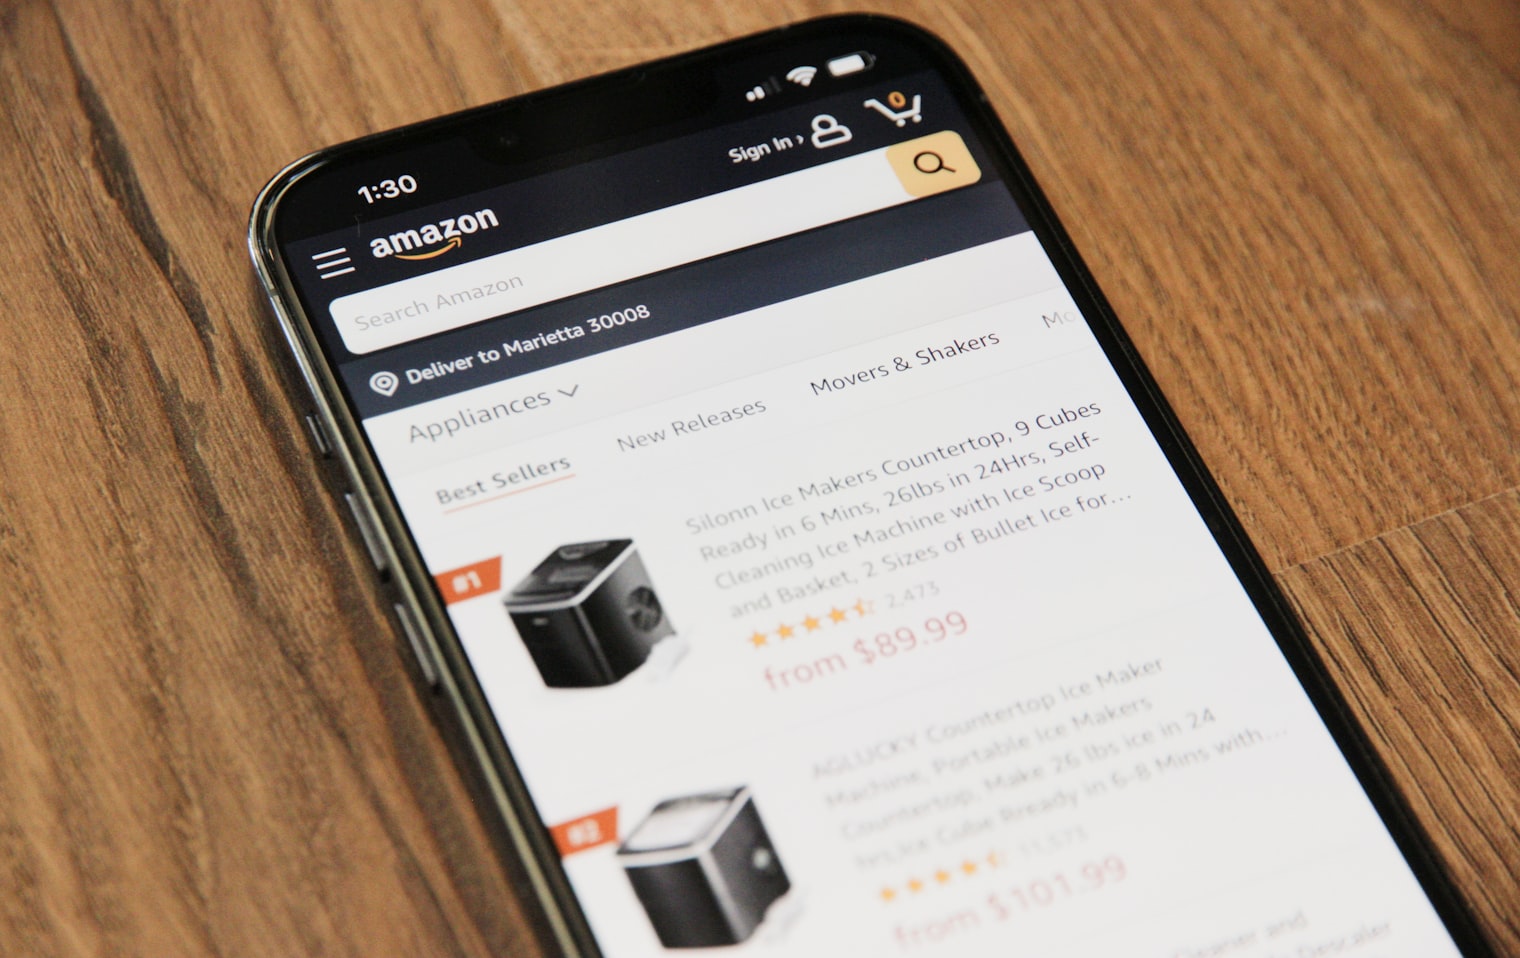 Product listing on amazon shown on cellphone screen